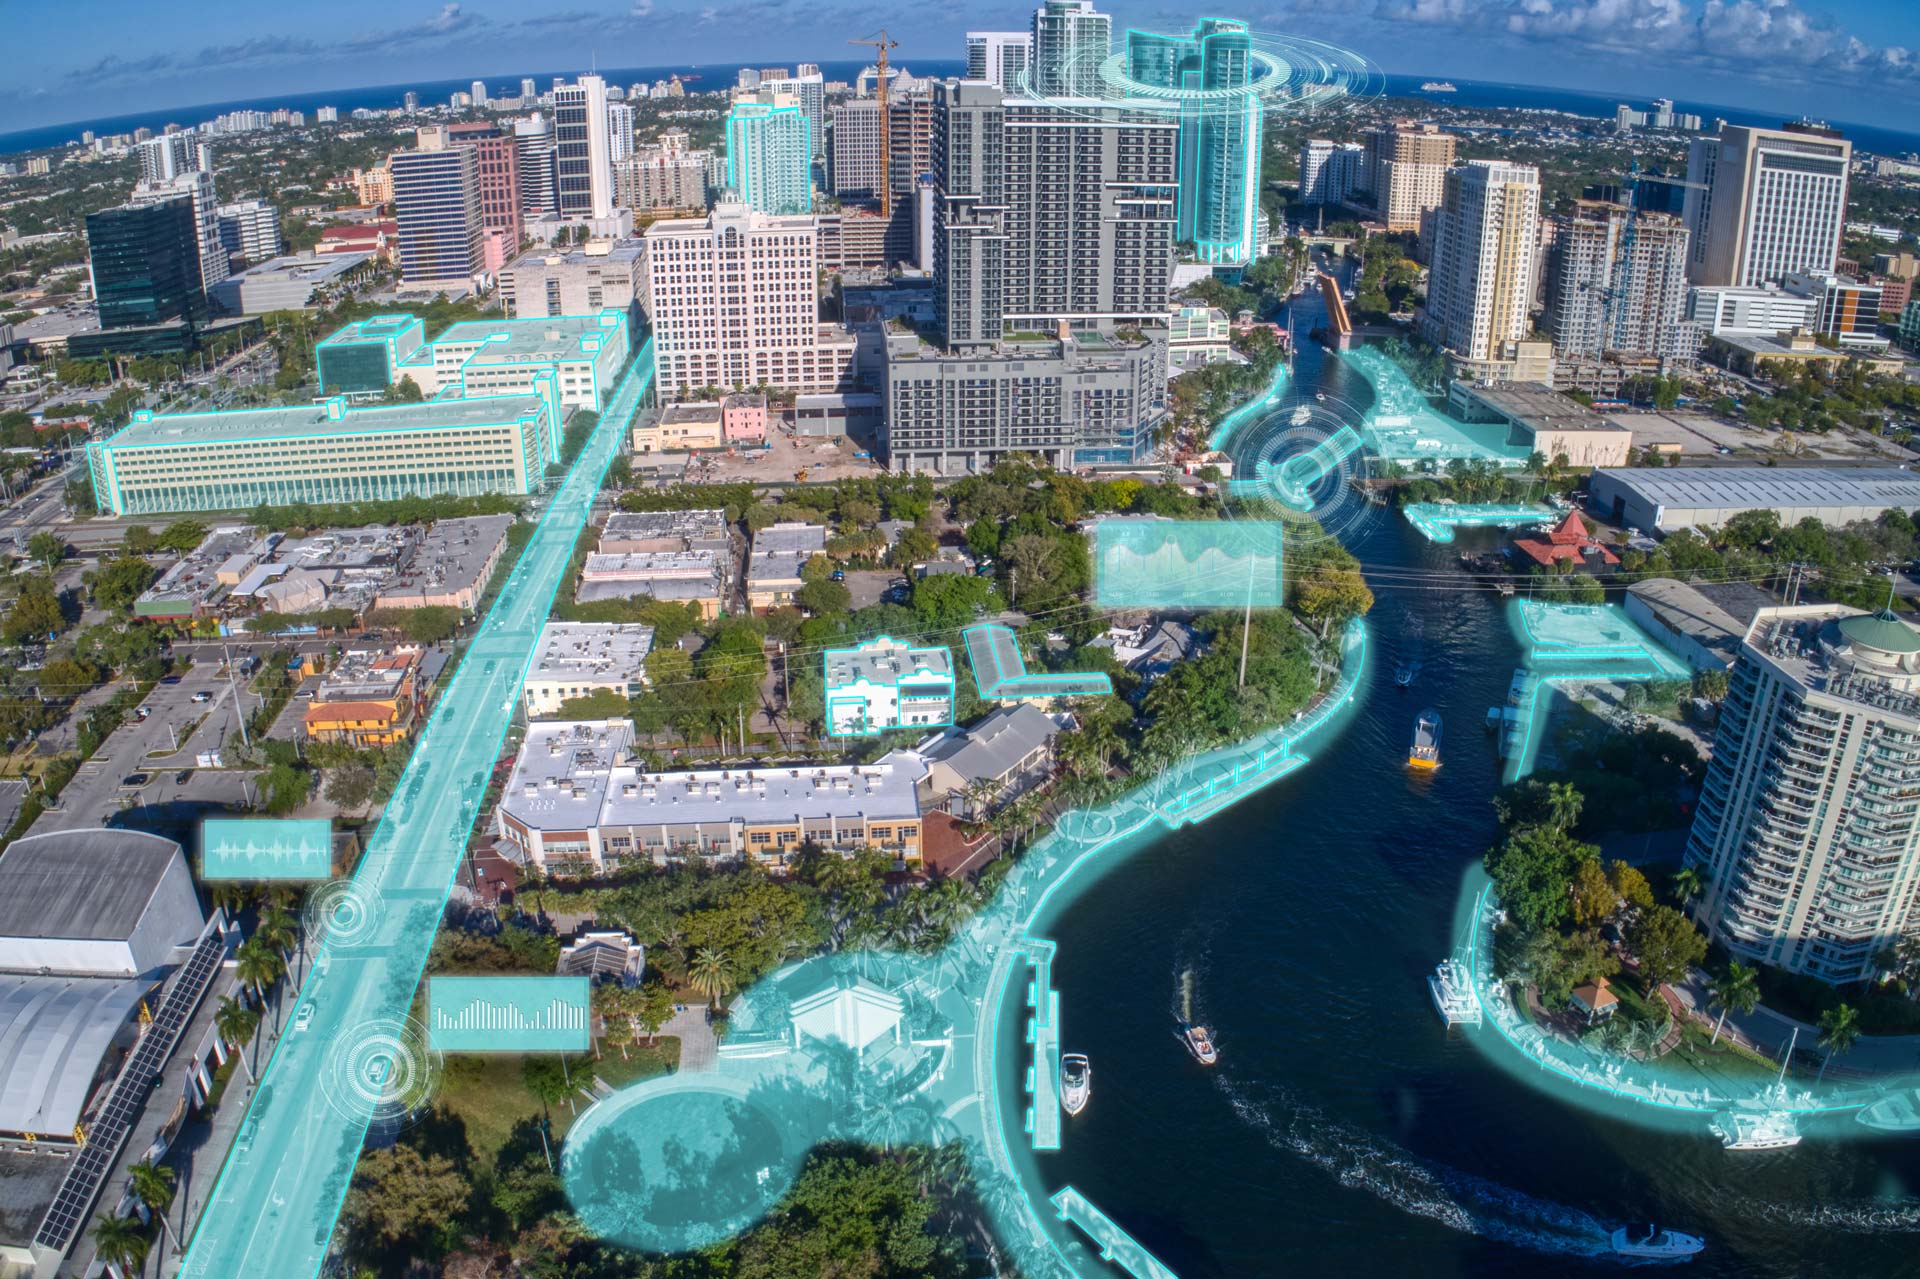 Aerial view of a city with a river running through it, featuring overlaid futuristic blue digital visuals highlighting key areas and buildings, presenting a visionary glimpse for MicroStation users in 2024.